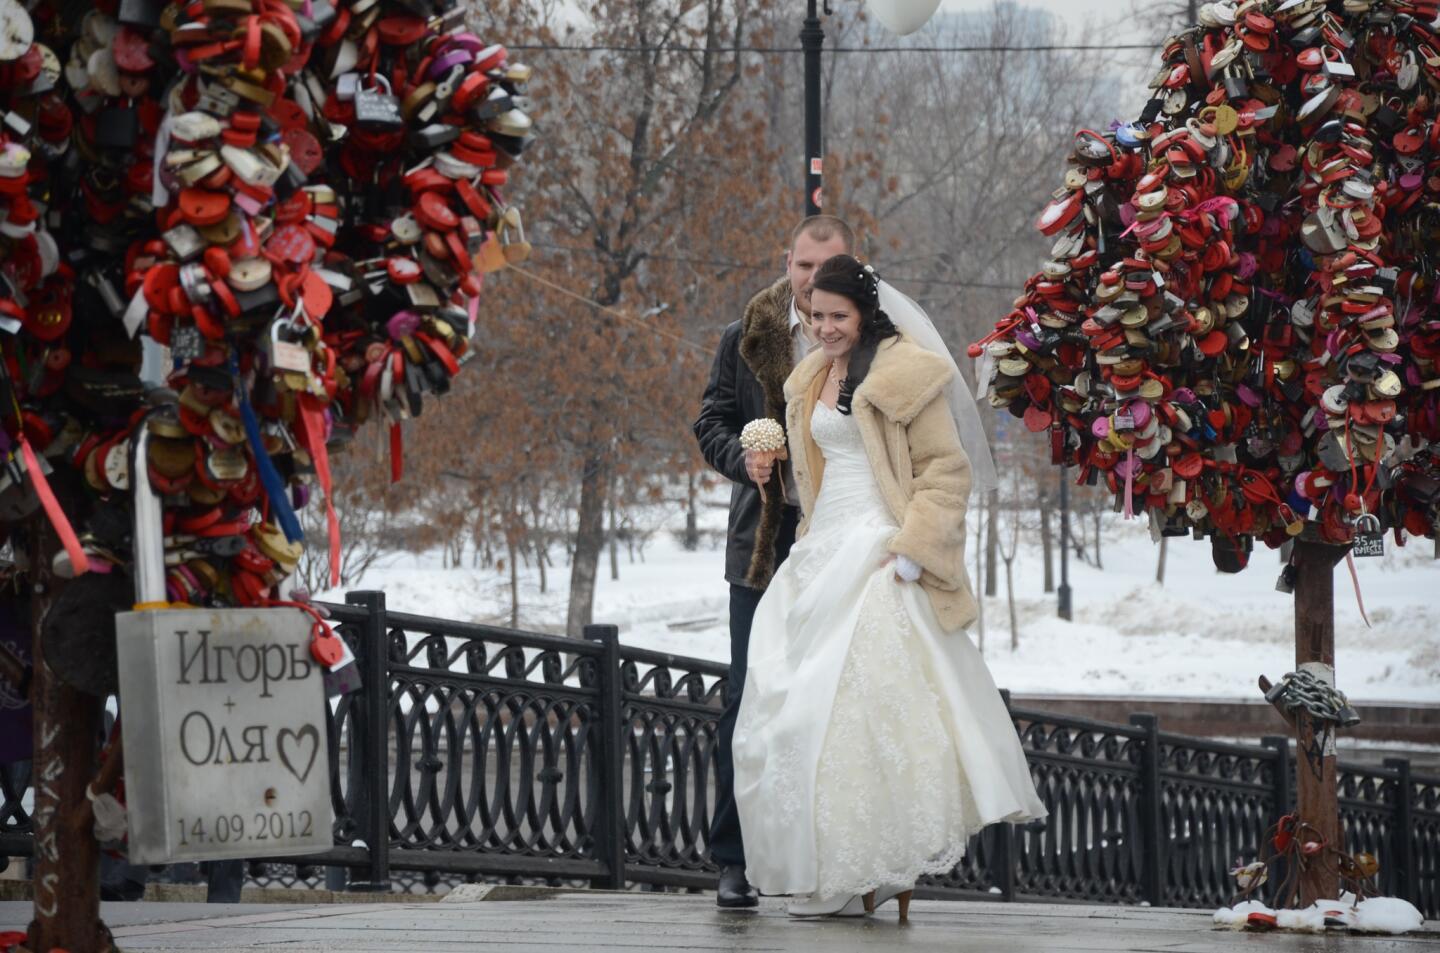 Moscow: Of love and locks